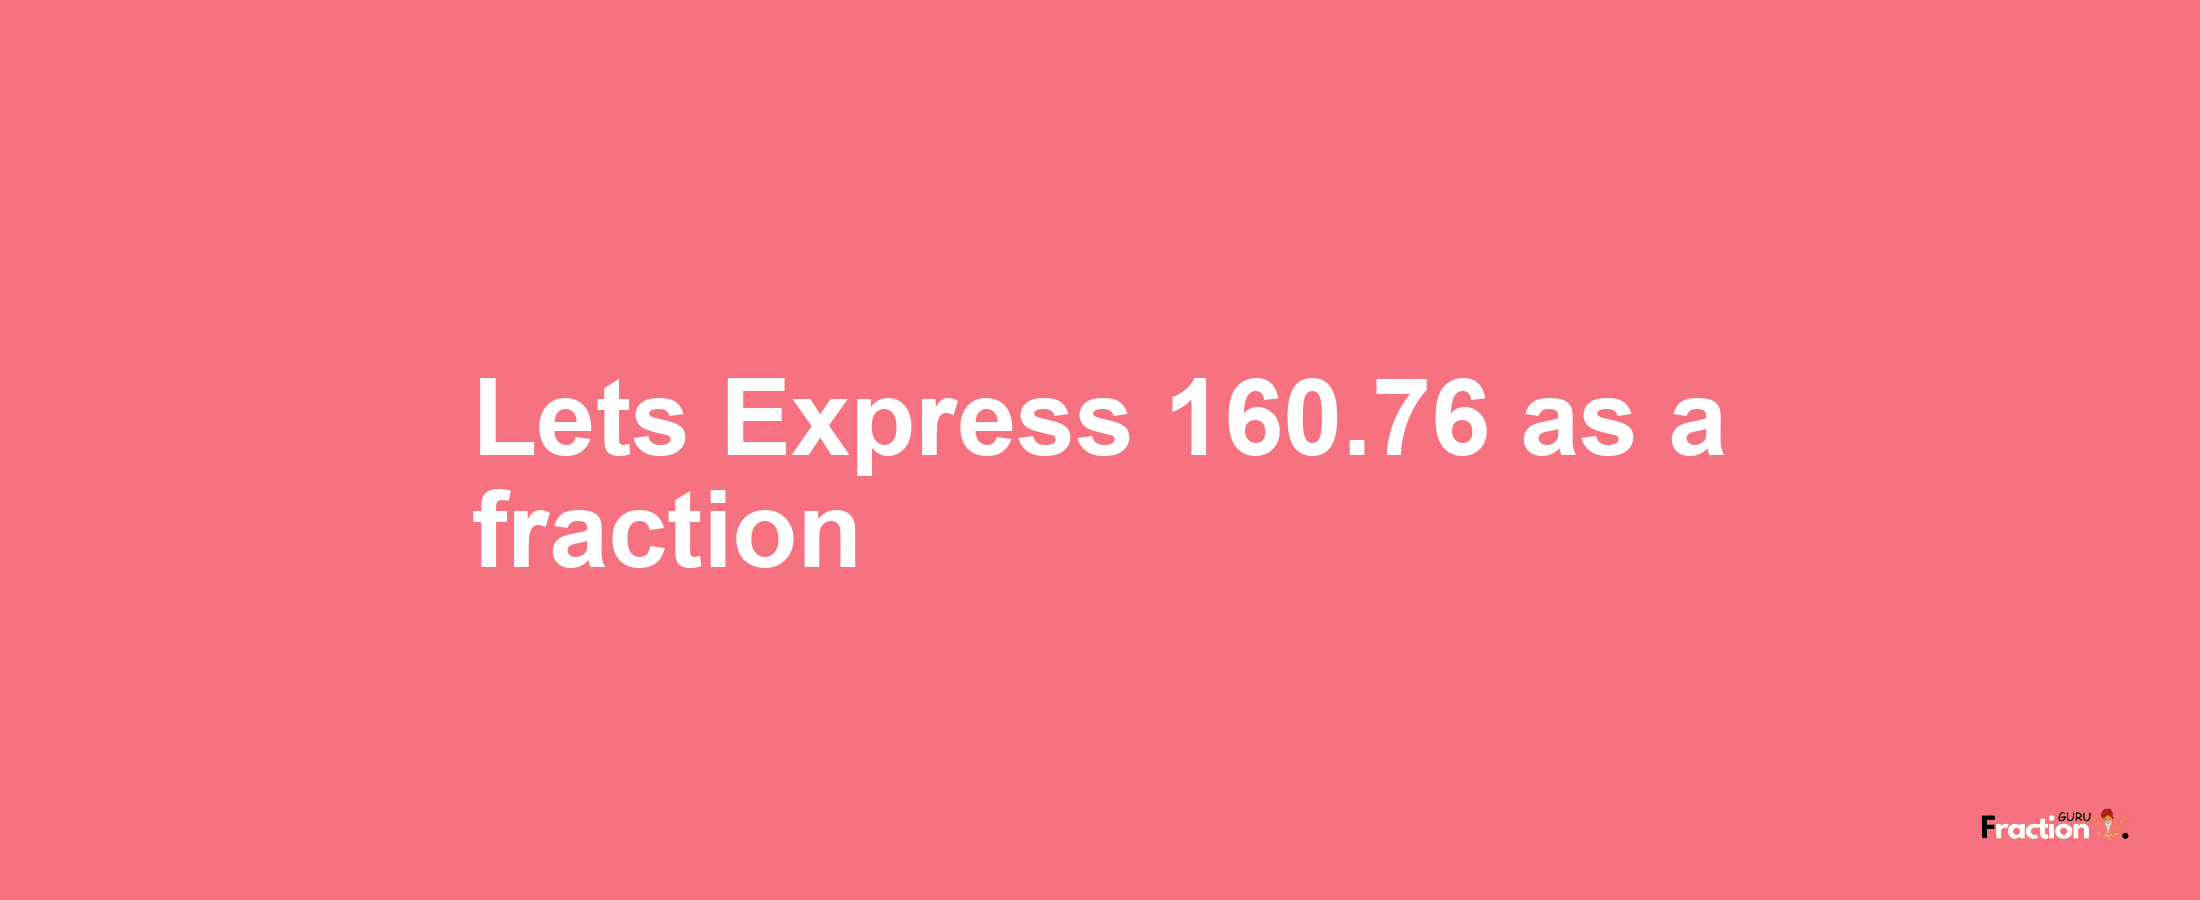 Lets Express 160.76 as afraction